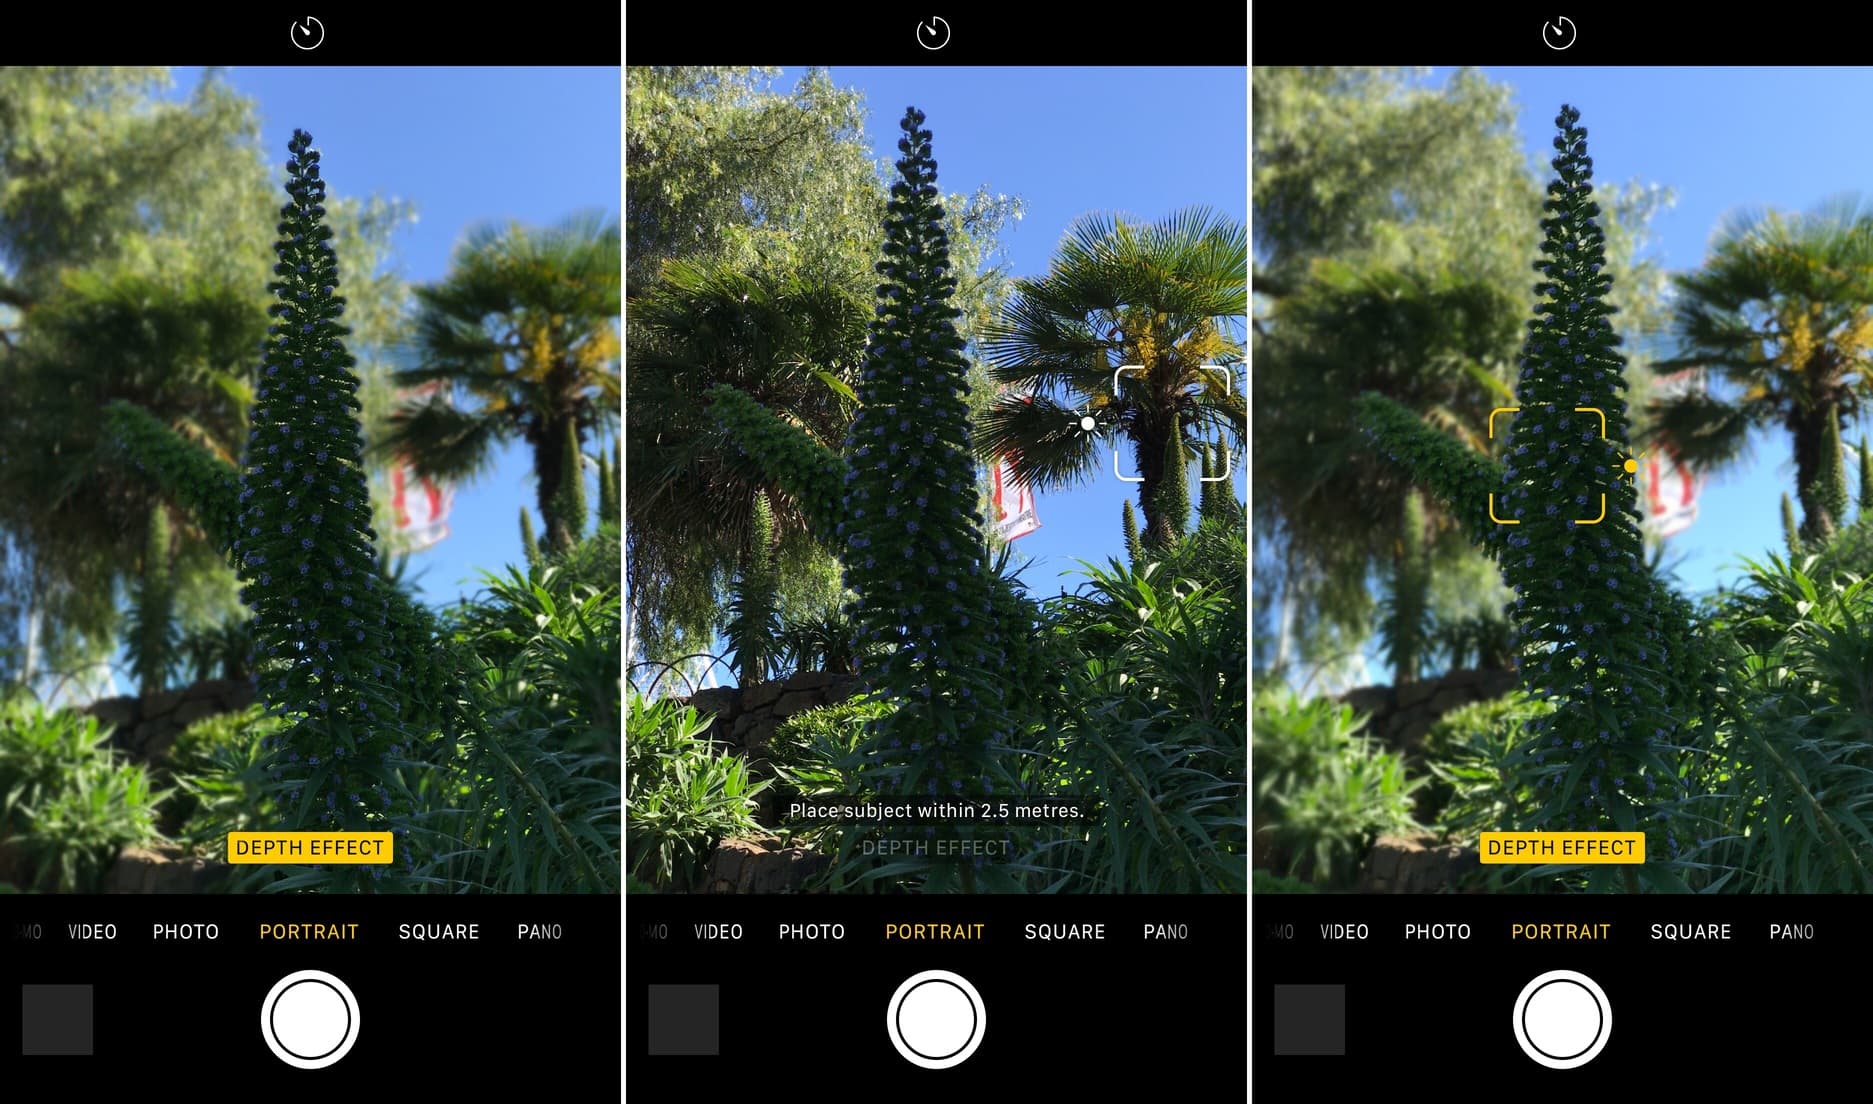 Manually tap for depth effect during portrait photo on iPhone